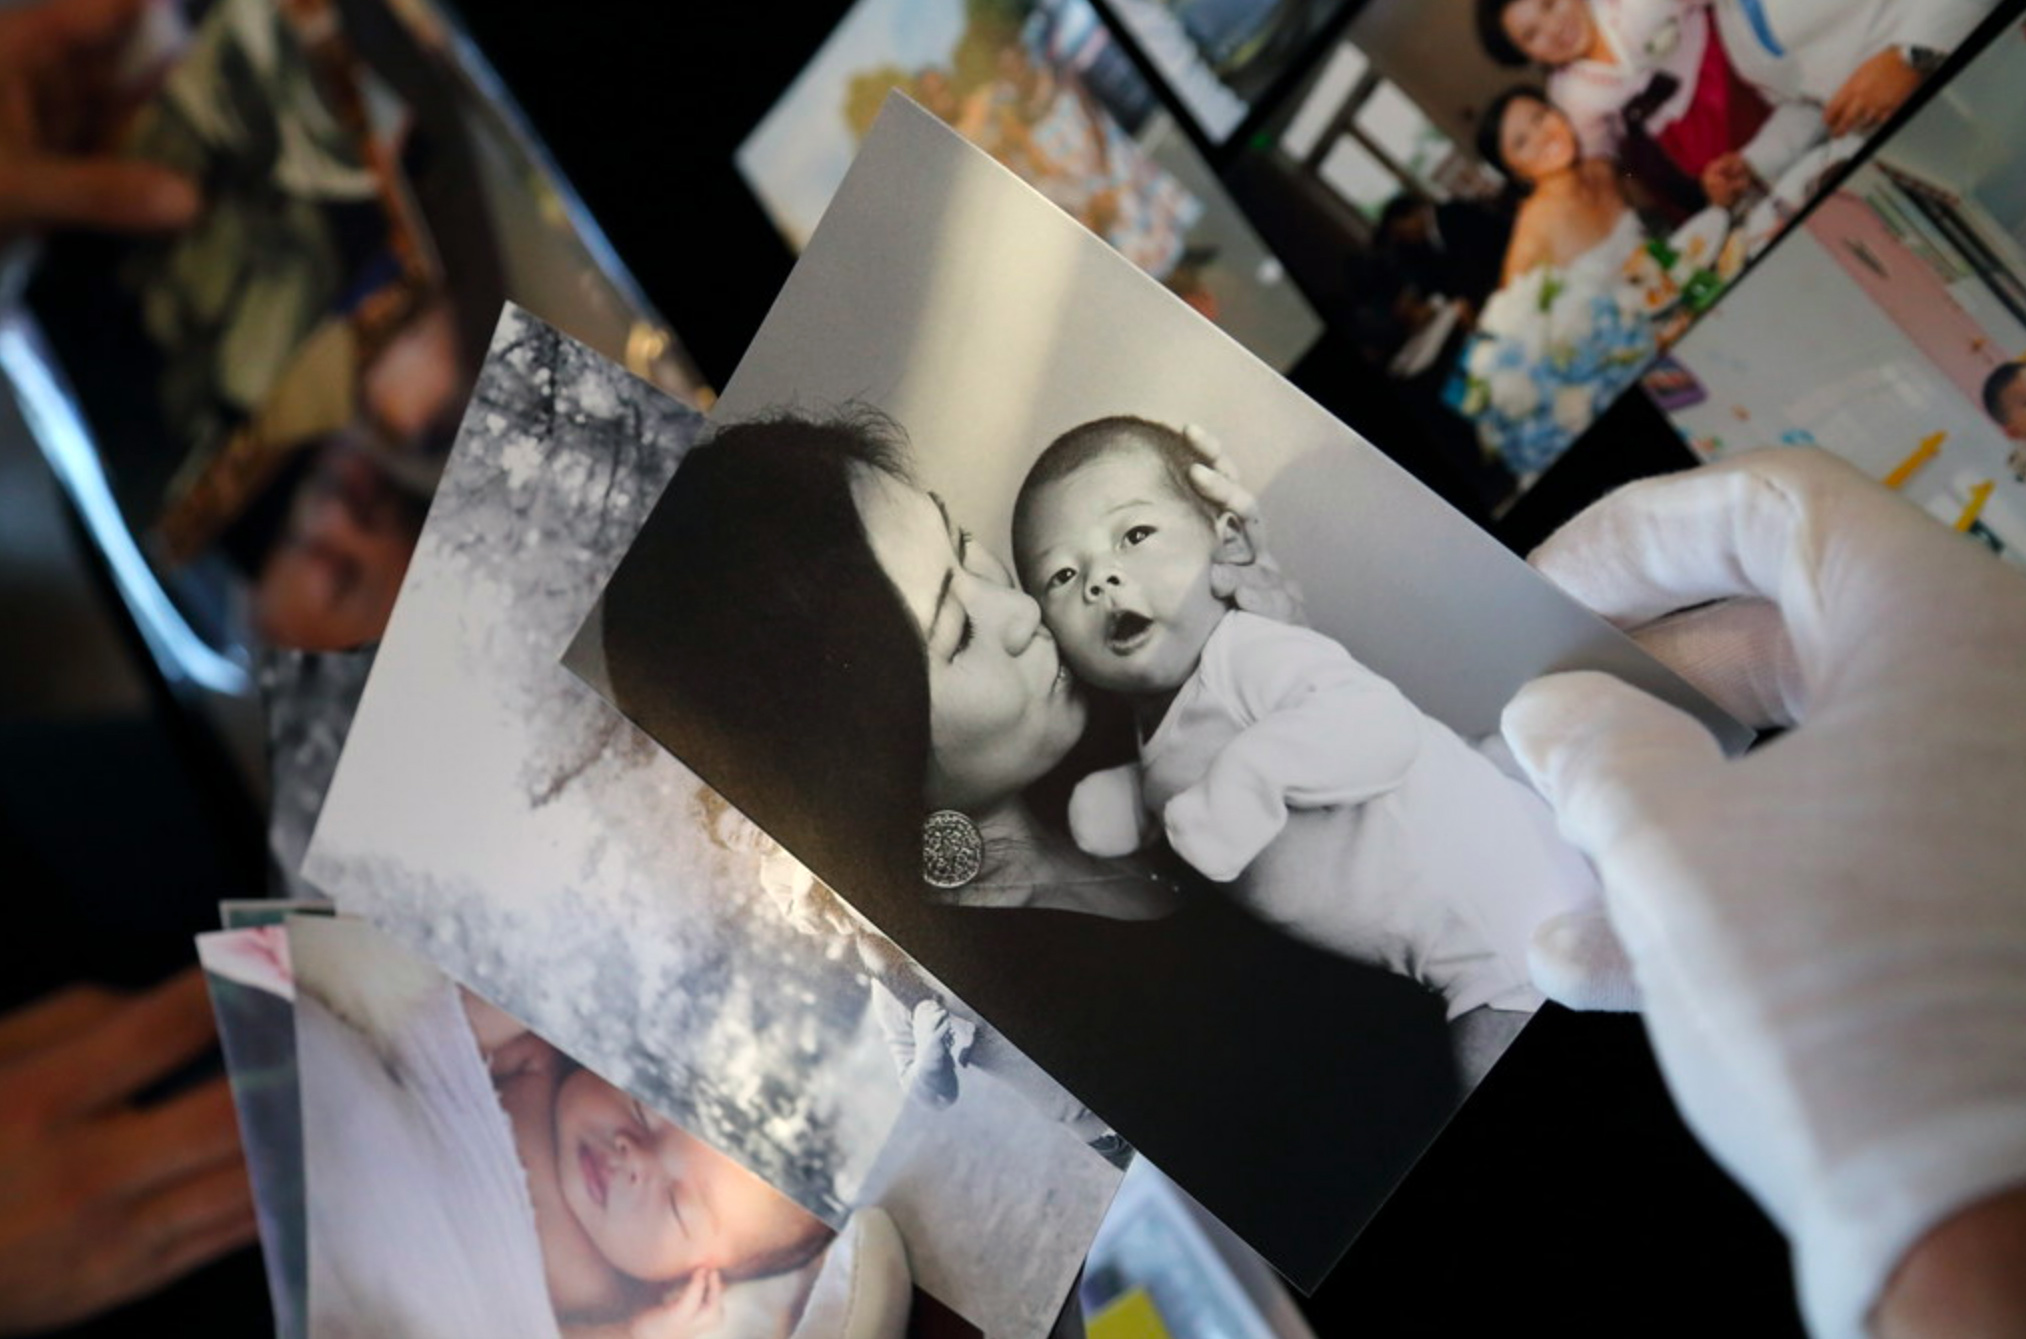 Family Pictures USA: why printed photos matter